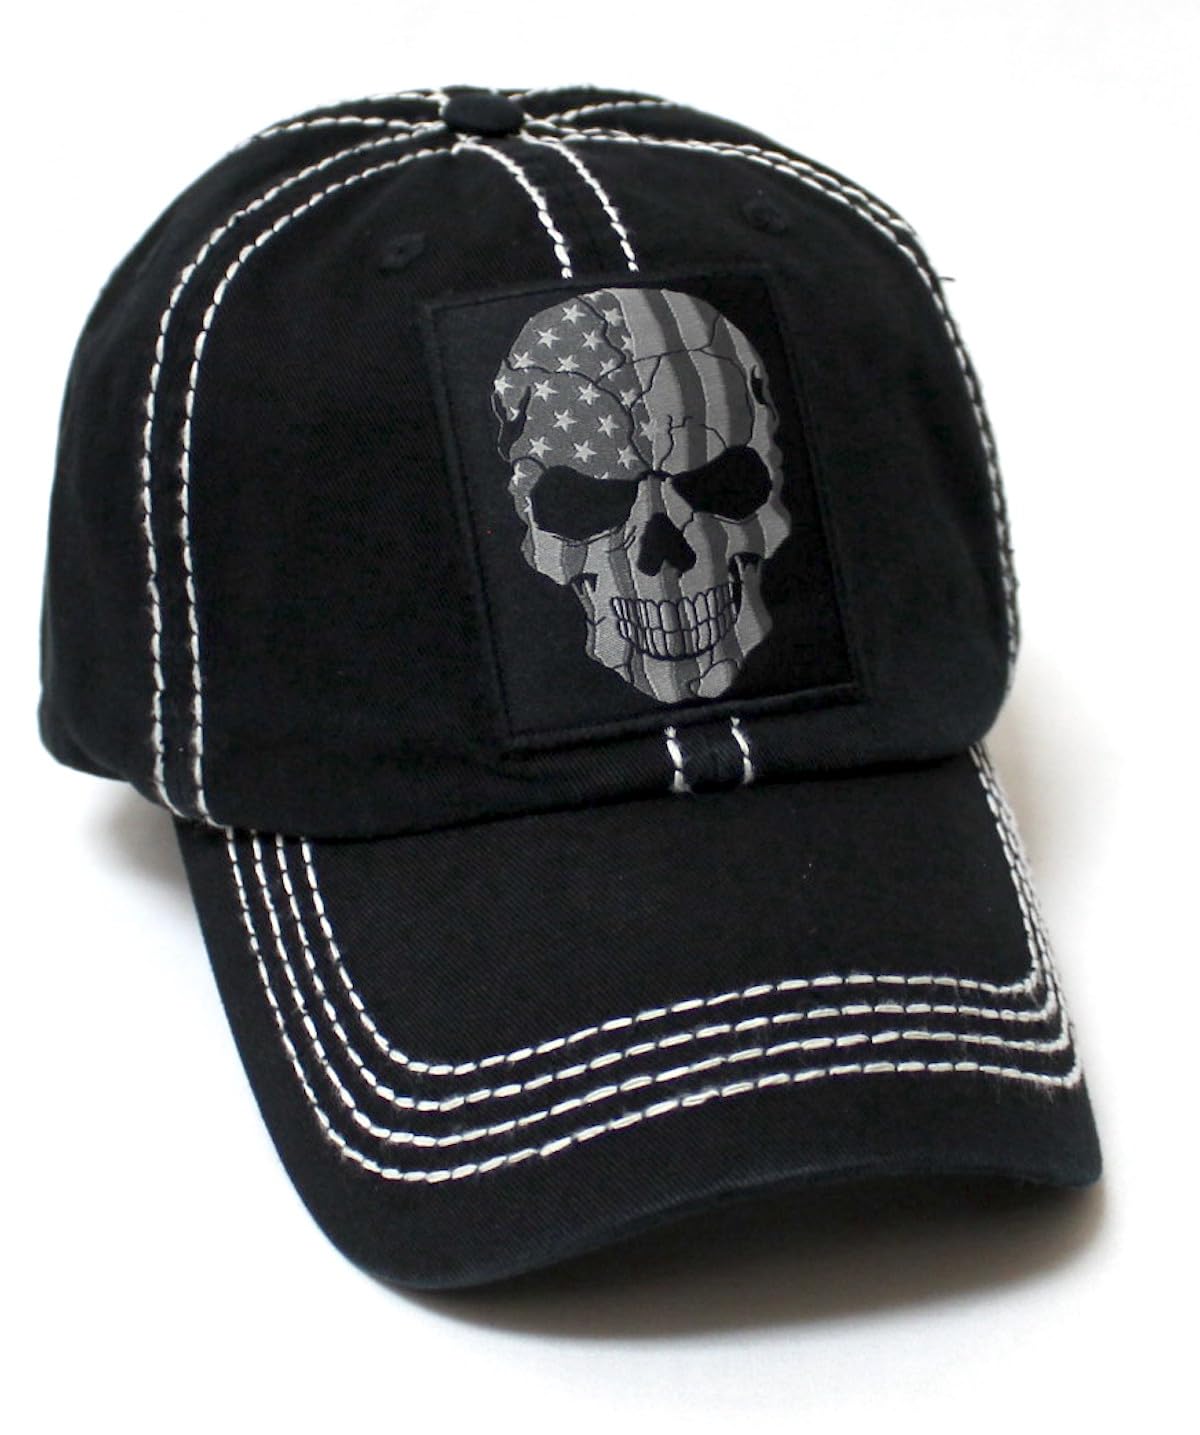 CAPS 'N VINTAGE Unisex Distressed Ballcap American Flag Skull Patch Embroidery Hat, Grunge Black